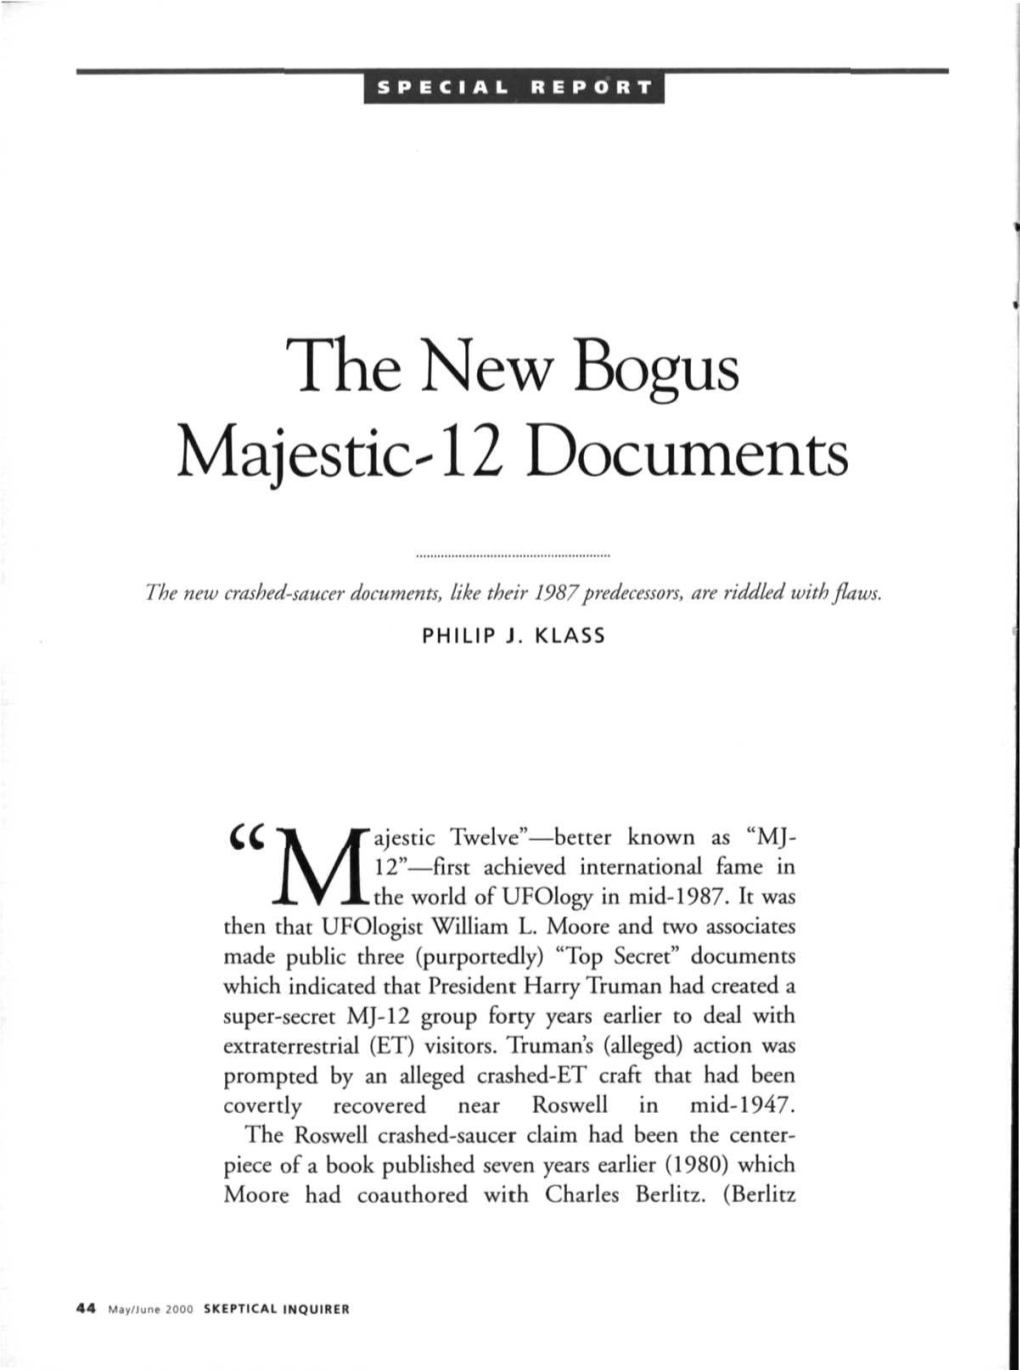 The New Bogus Majestic-12 Documents